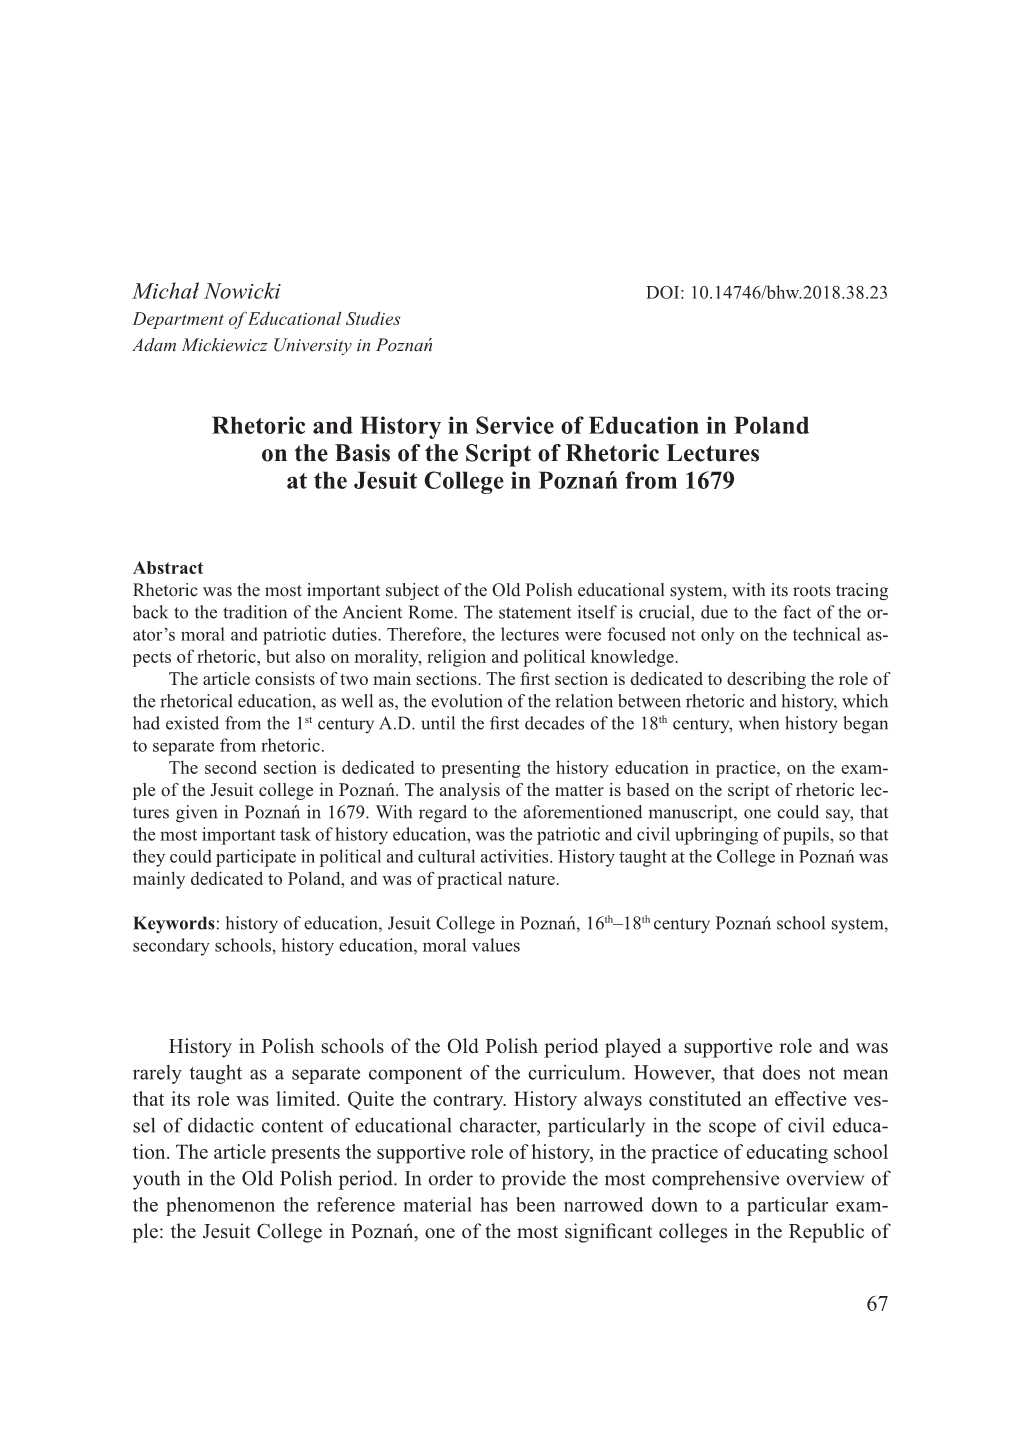 Rhetoric and History in Service of Education in Poland on the Basis of the Script of Rhetoric Lectures at the Jesuit College in Poznań from 1679